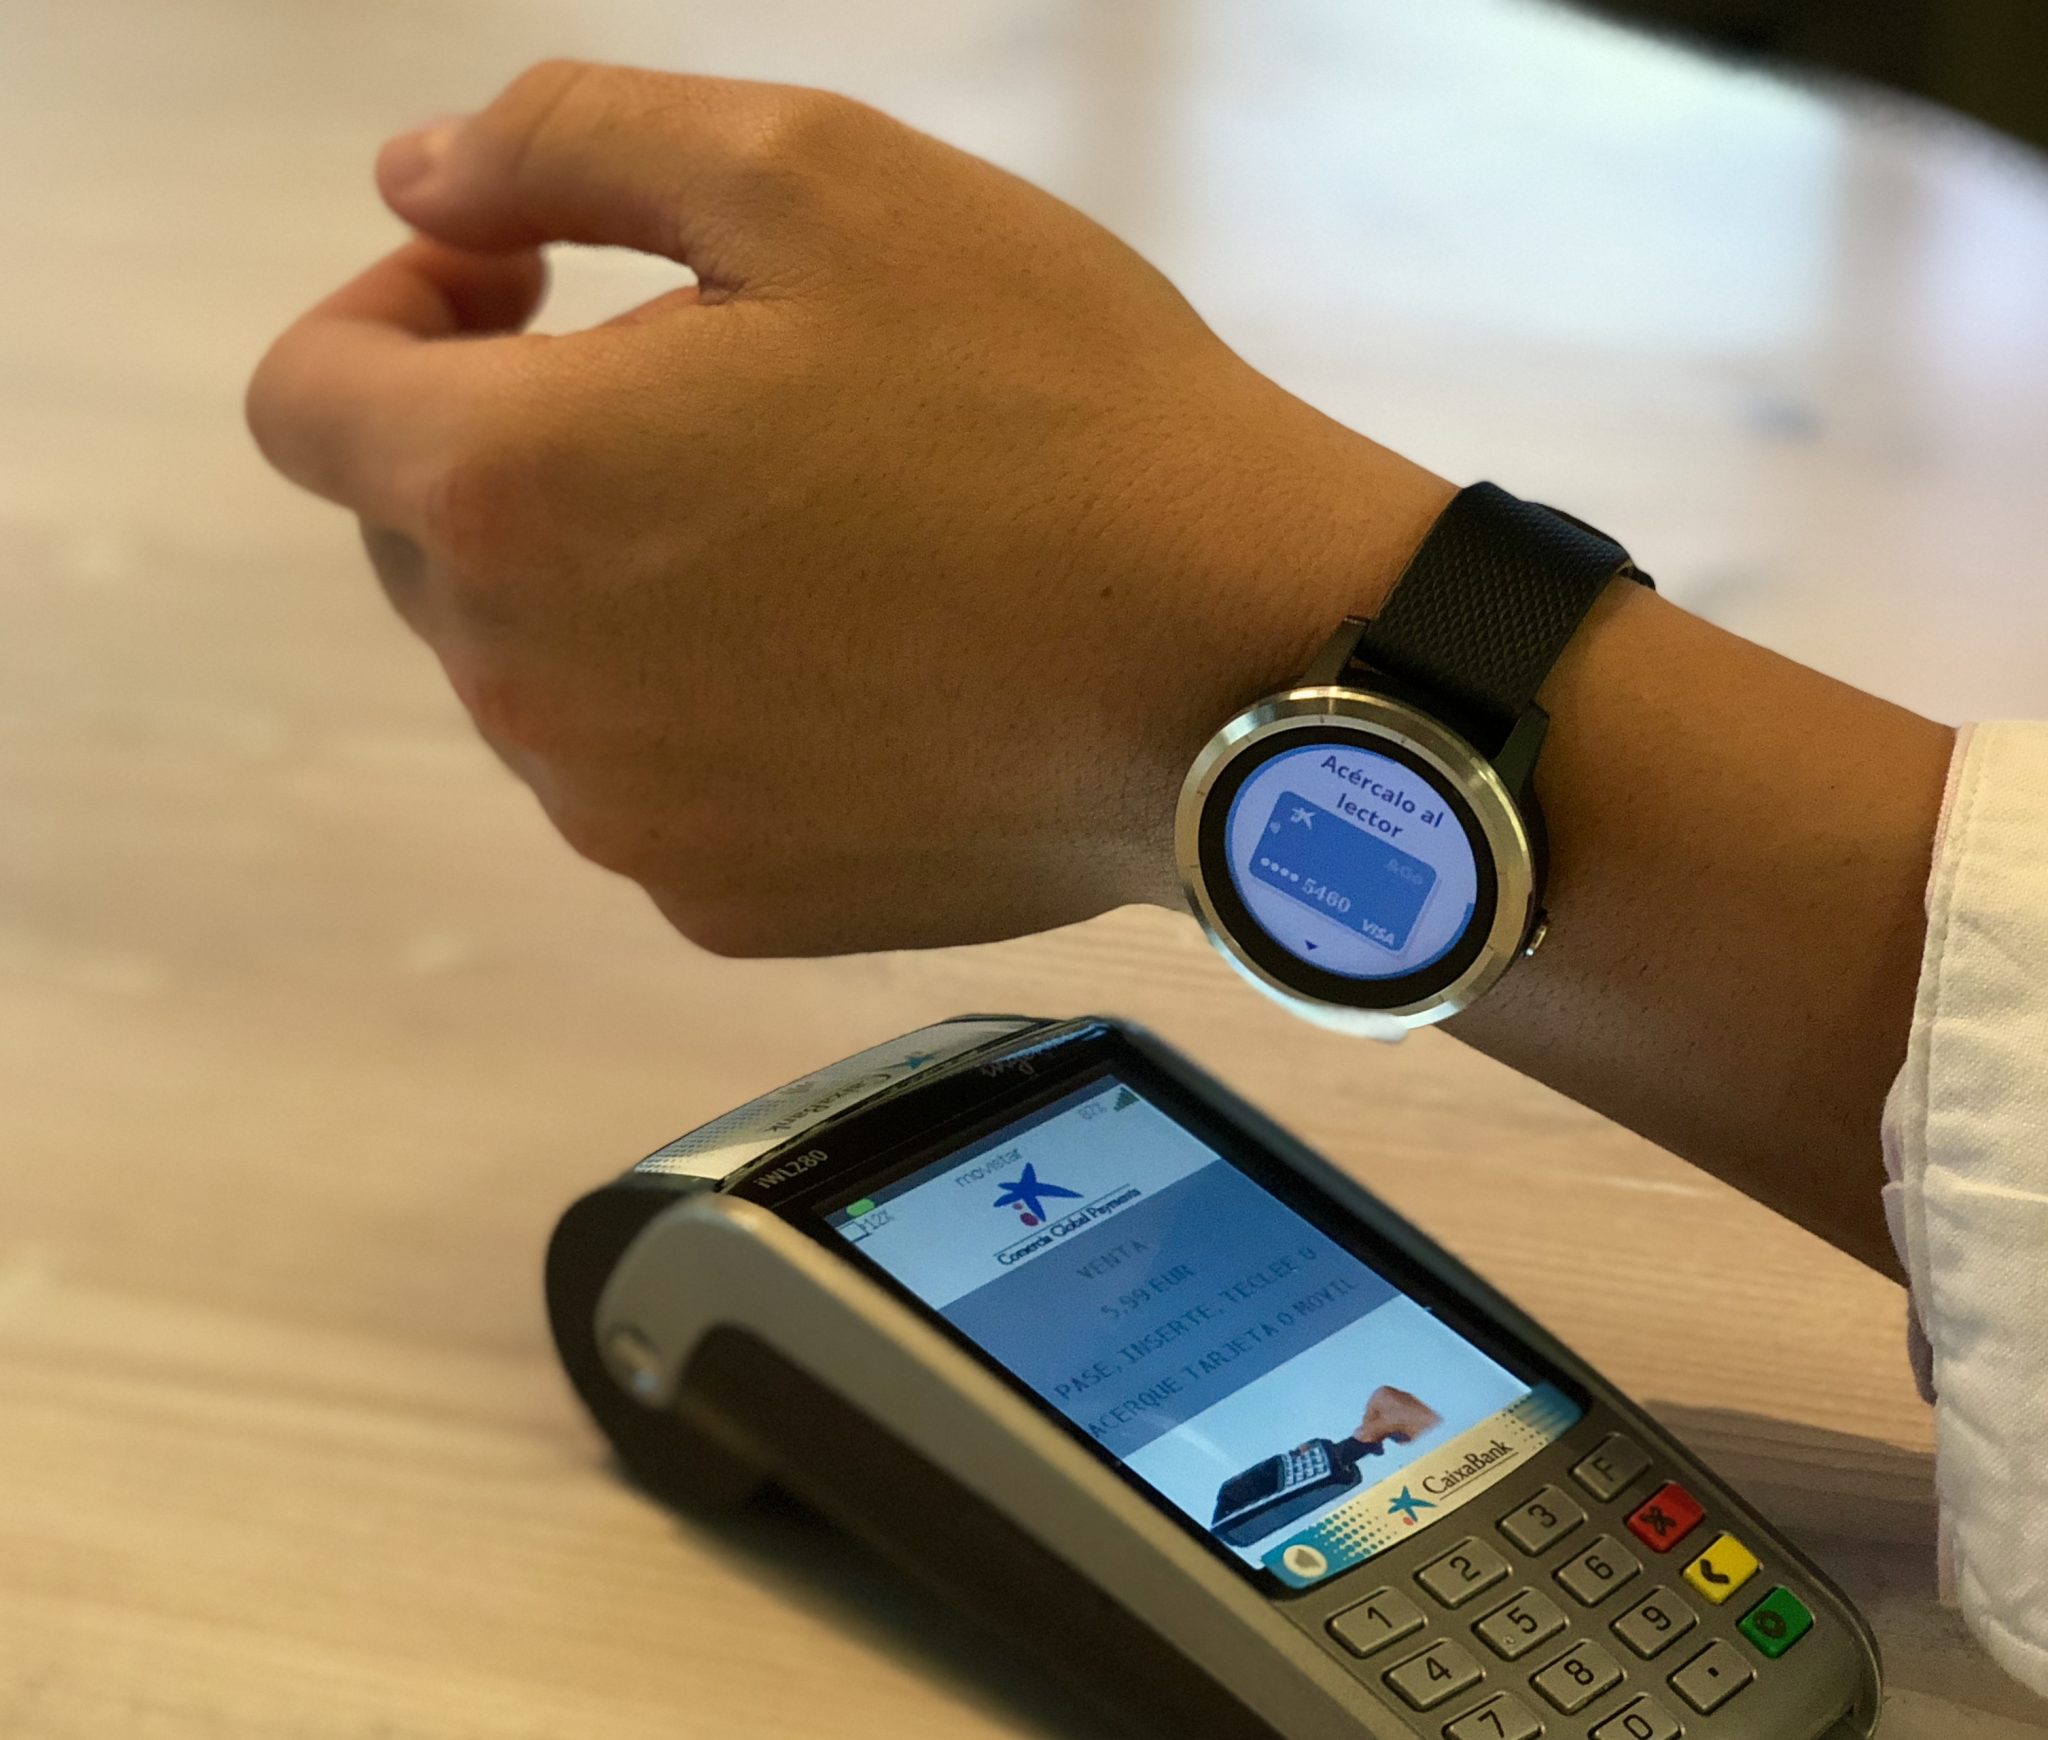 Hold sammen med Puno Tilladelse CaixaBank and Visa take it up a watch with Garmin Pay - FinTech Futures